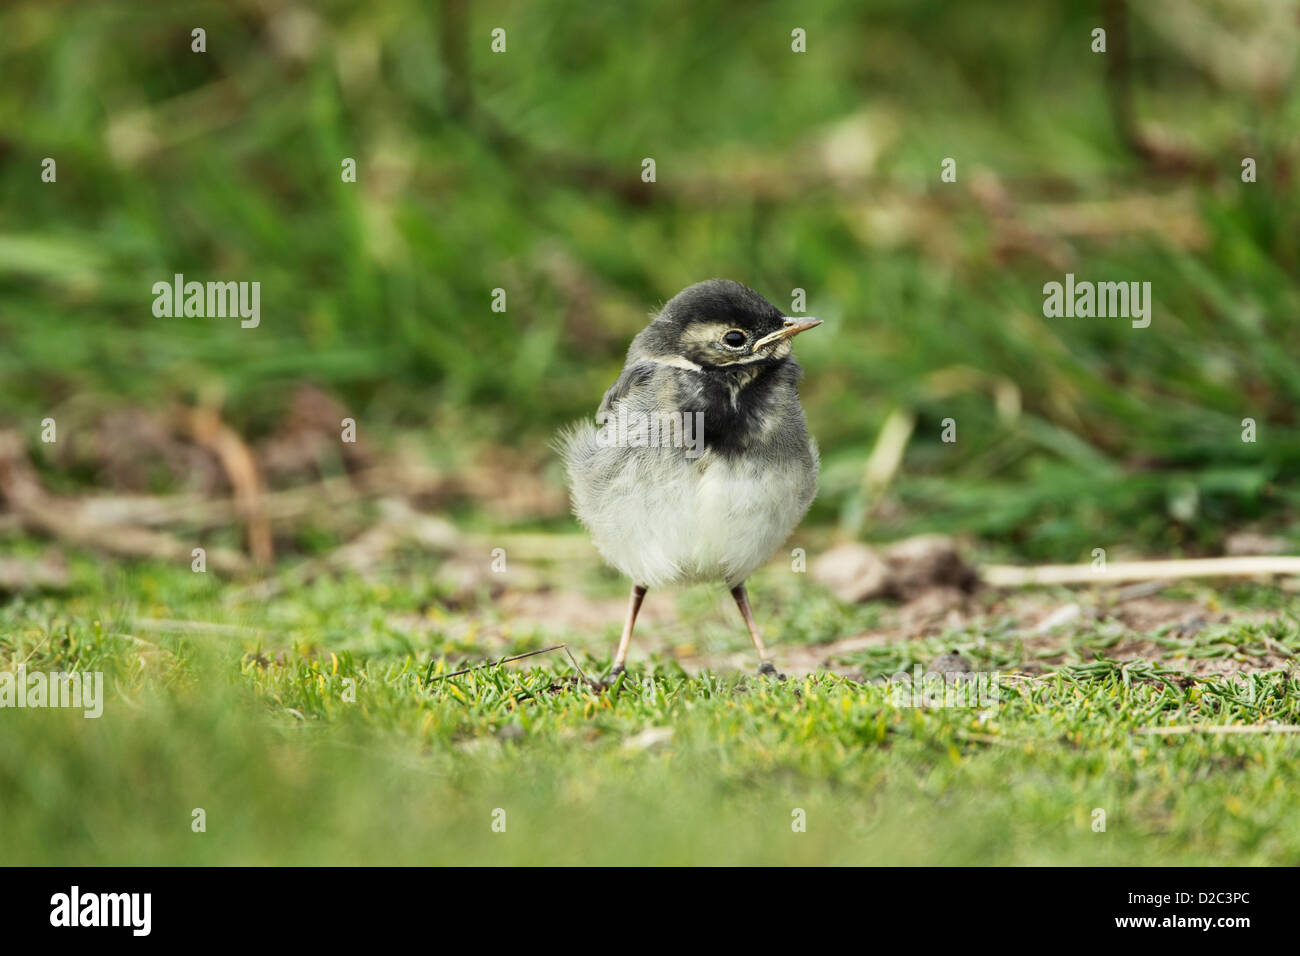 A juvenile pied wagtail (Motacilla alba) standing on the ground Stock Photo